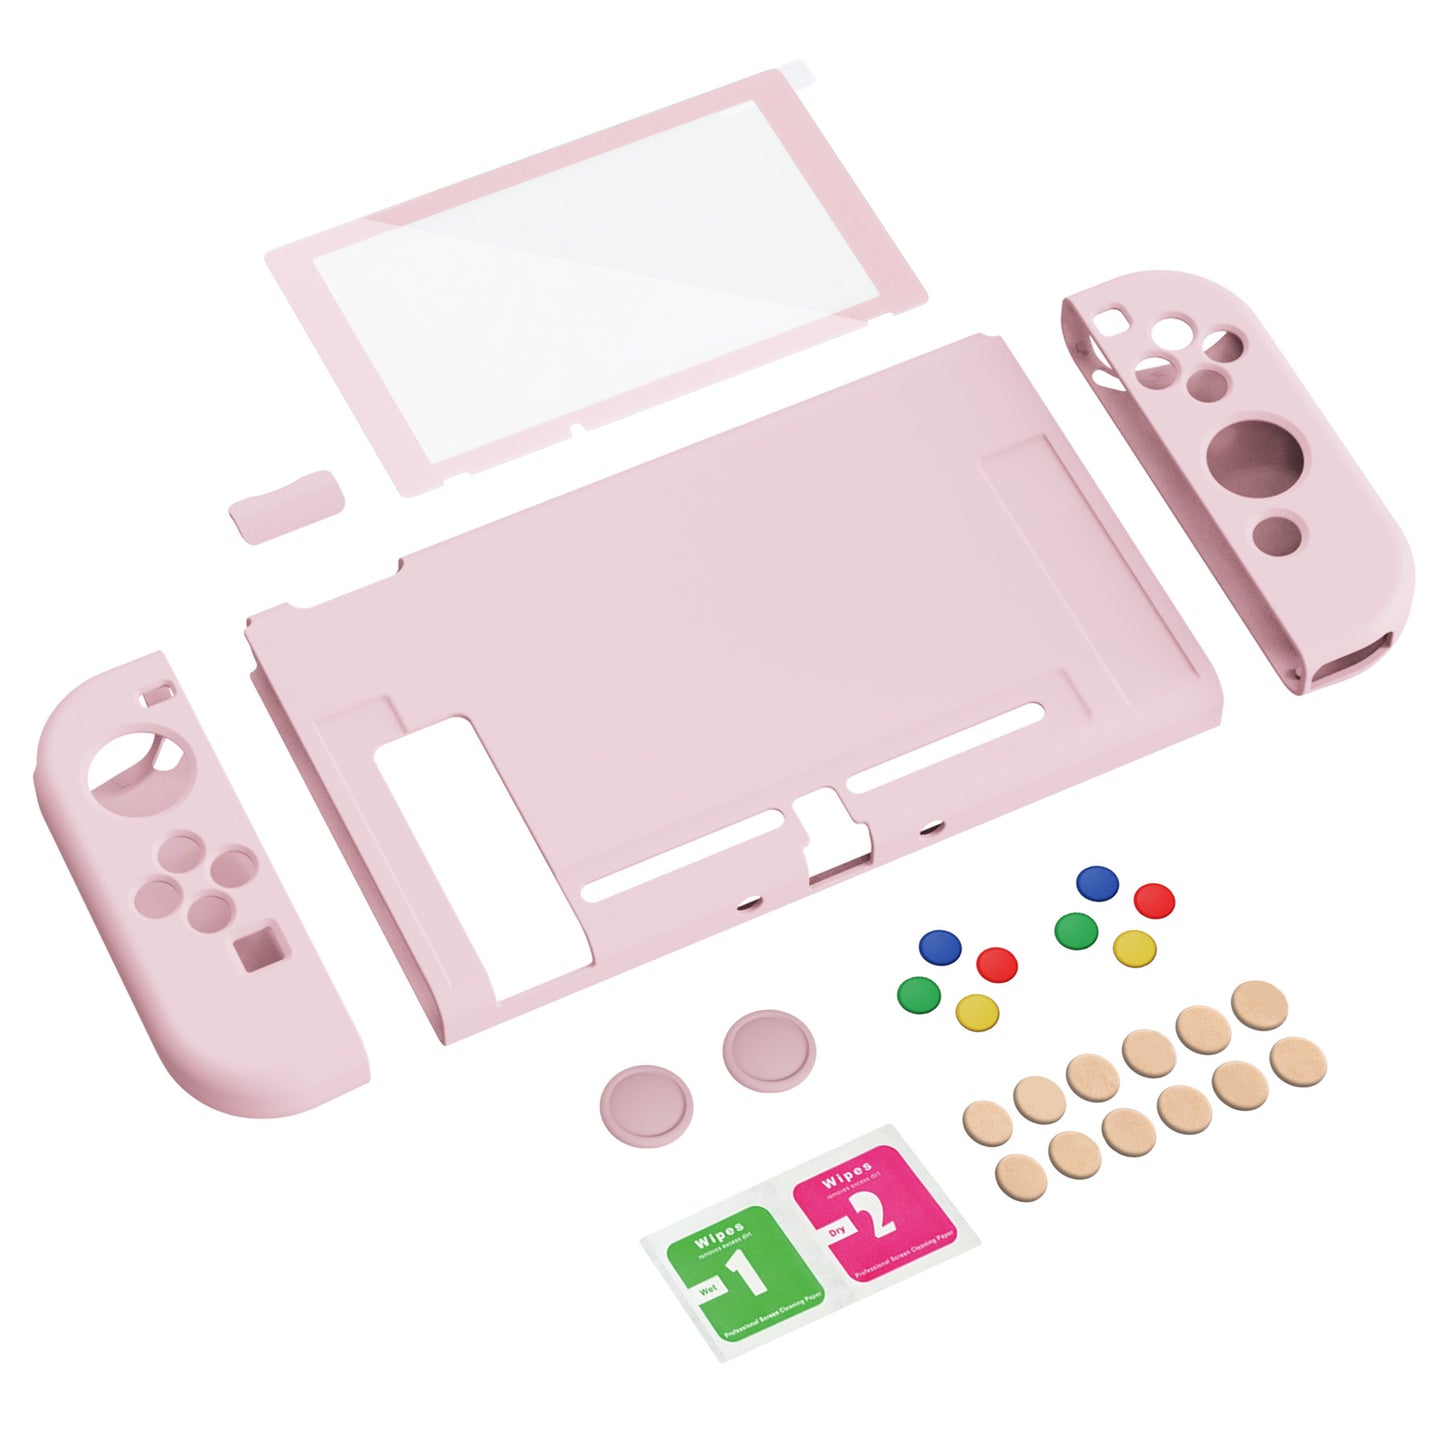 PlayVital ZealProtect Soft TPU Slim Protective Case with Tempered Glass Screen Protector & Thumb Grips & ABXY Direction Button Caps for NS Switch - Cherry Blossoms Pink - RNSYM5002 playvital